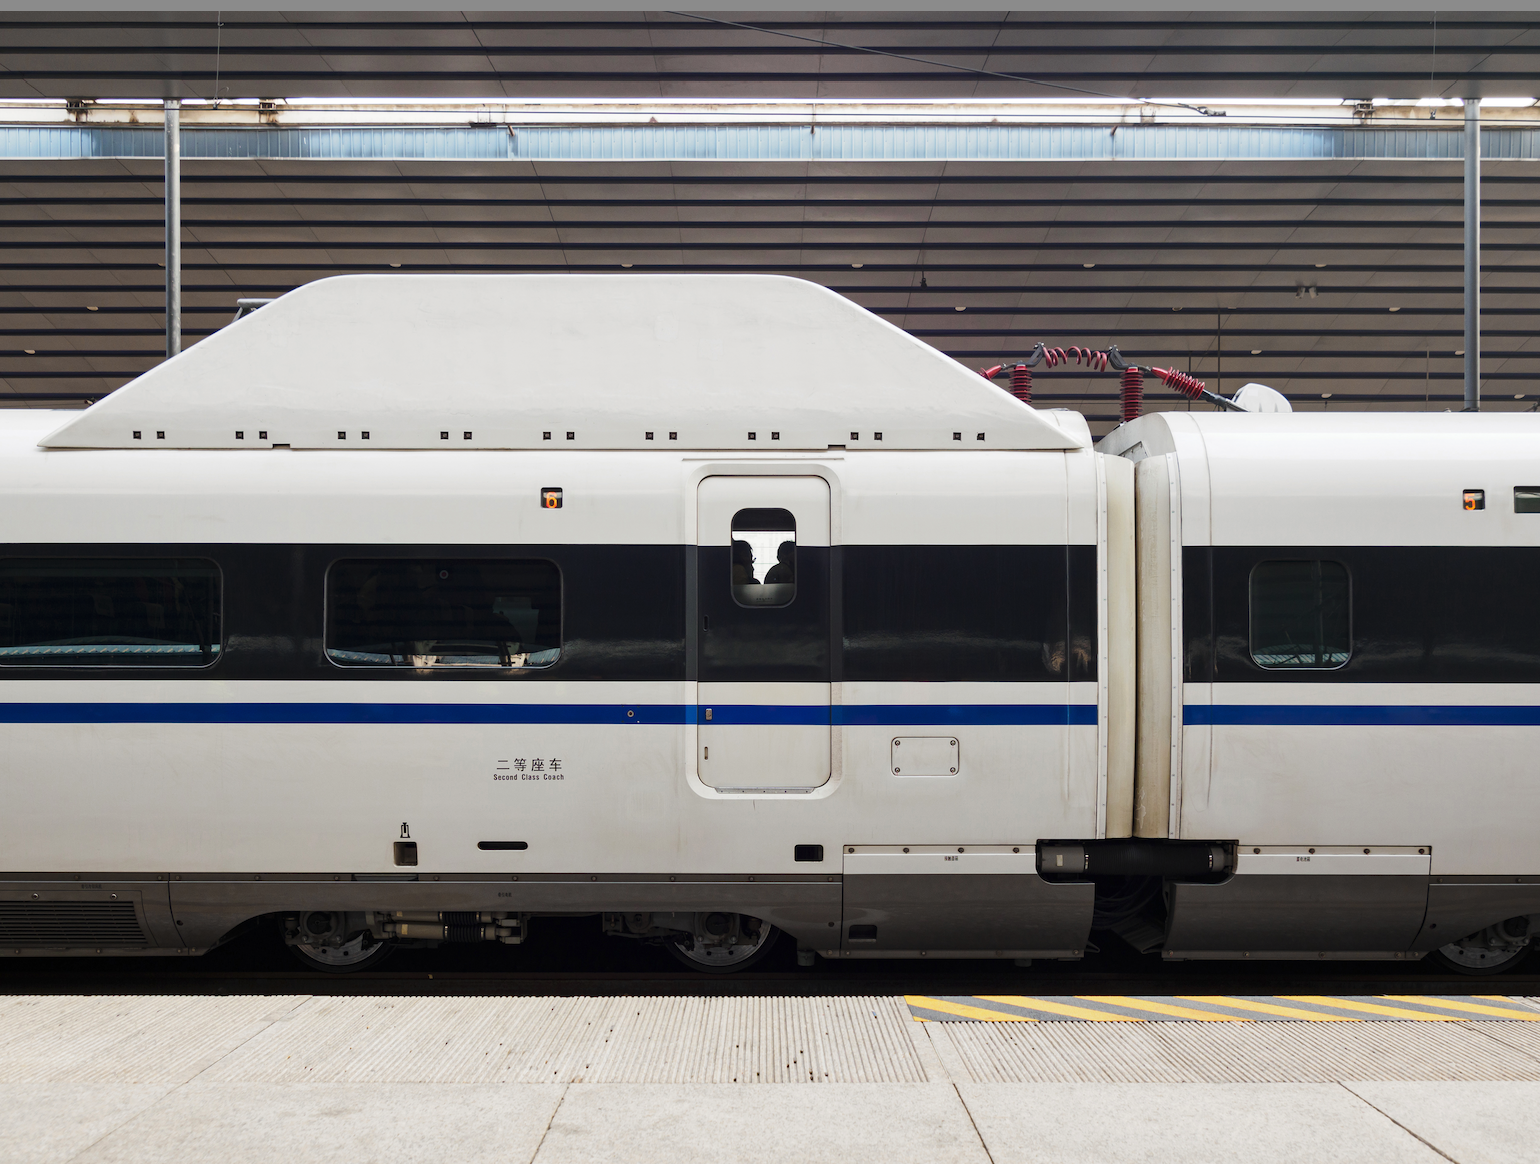 The importance of cybersecurity in the rail industry